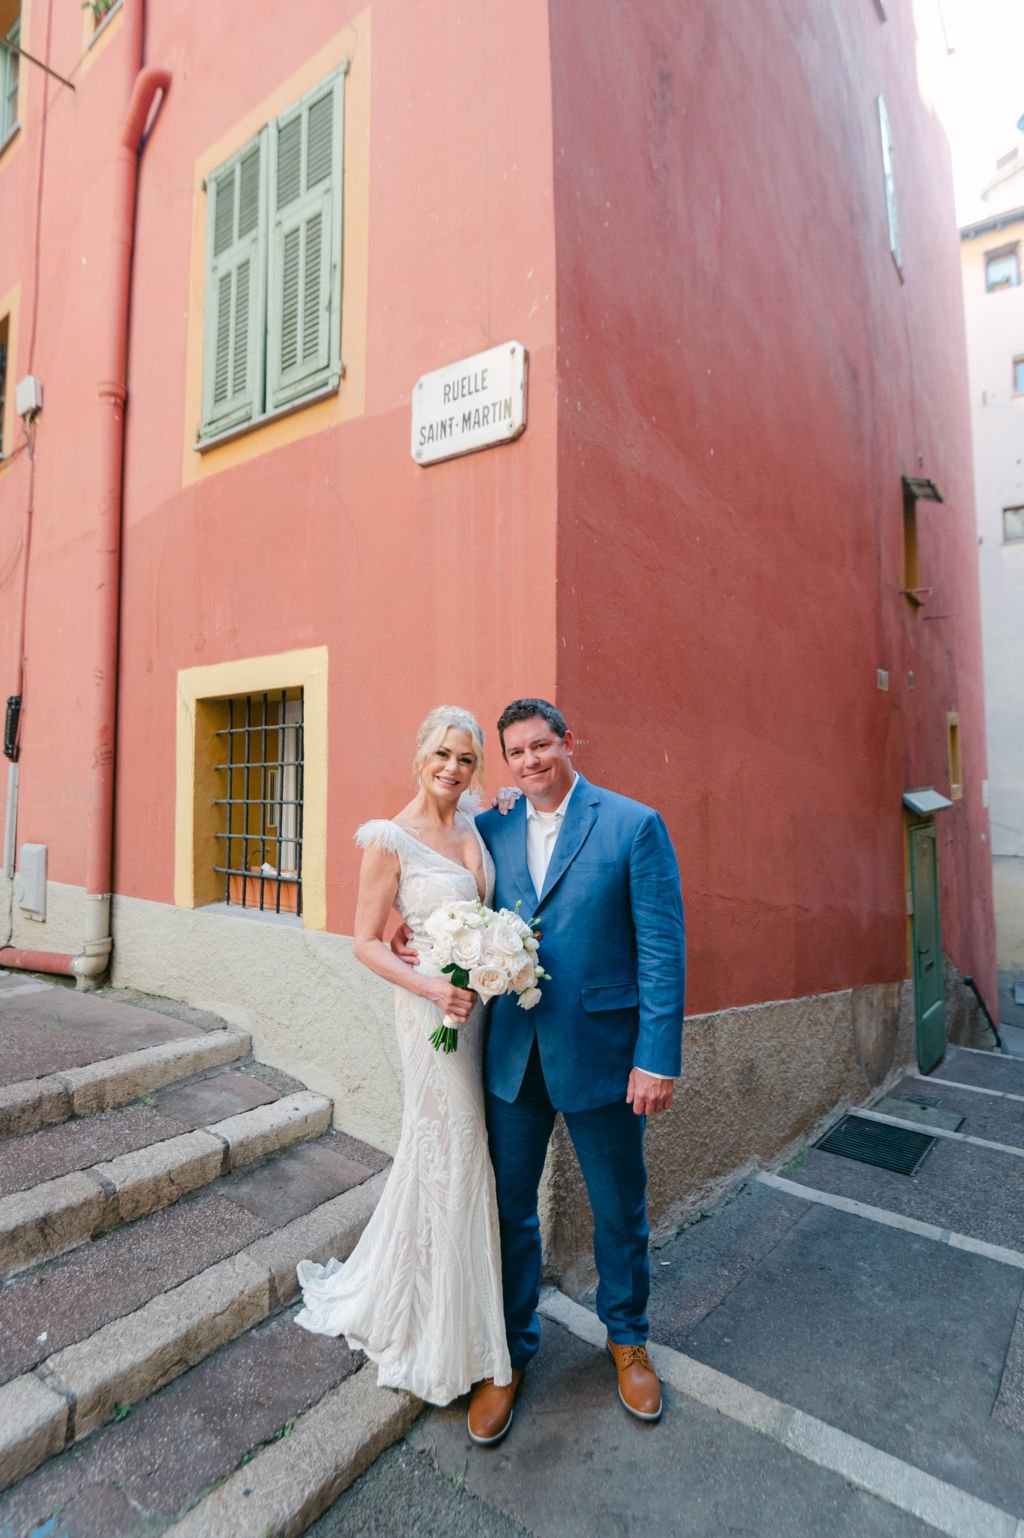 wedding photographer Nice, France Cote d'Azur photo session bride and groom Nice old town sedinta foto nunta Nisa Franta fotograf nunta Franta